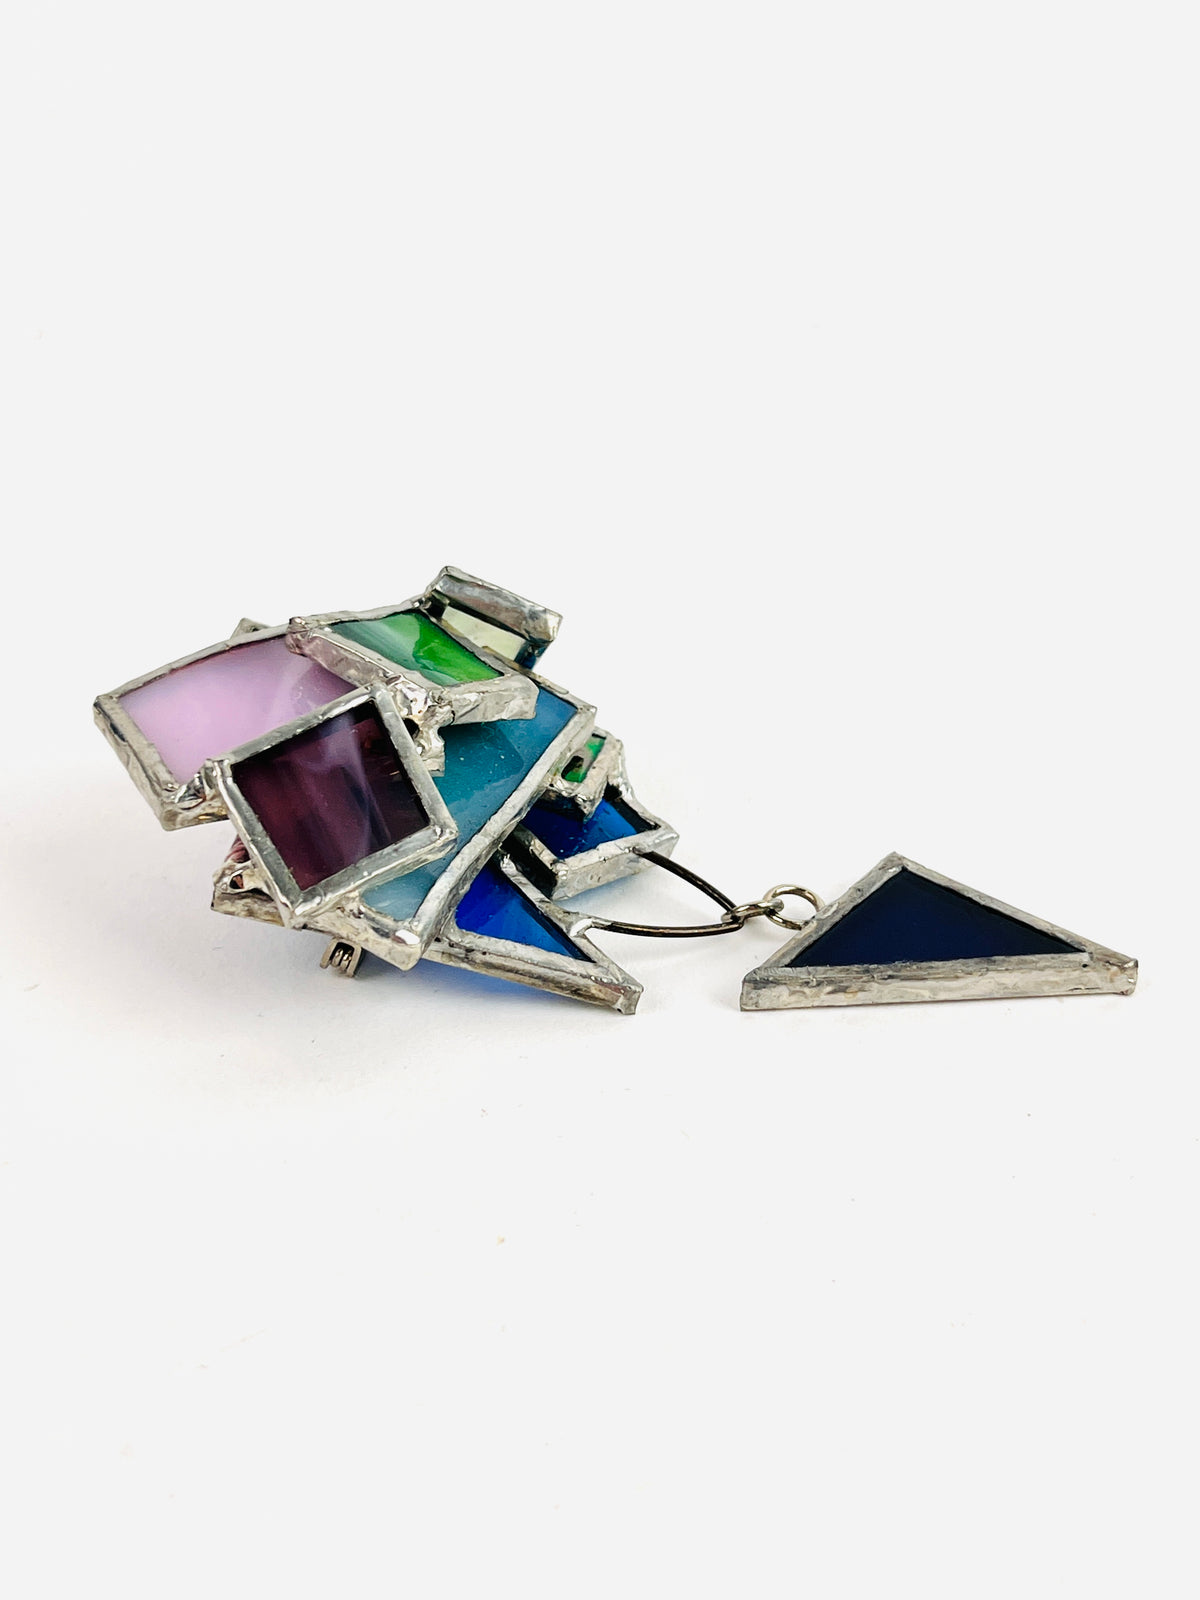 Vintage Stained Glass Brooch